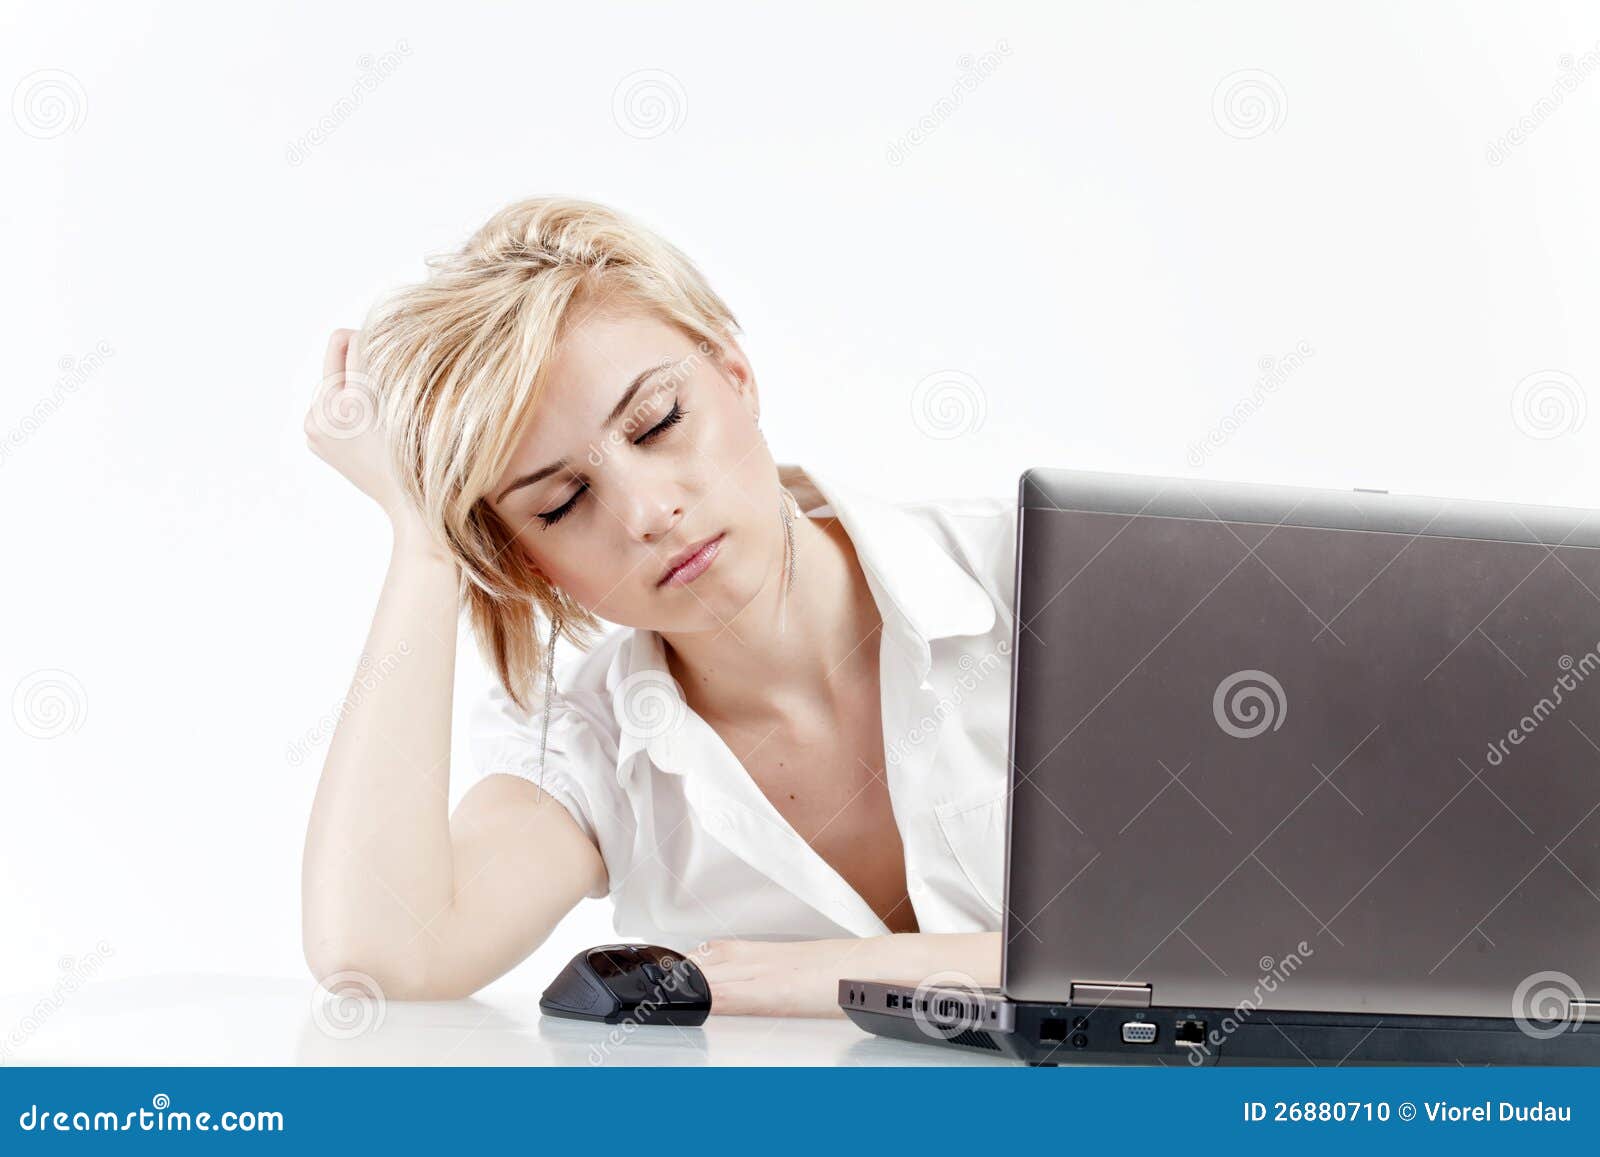 woman tired at work